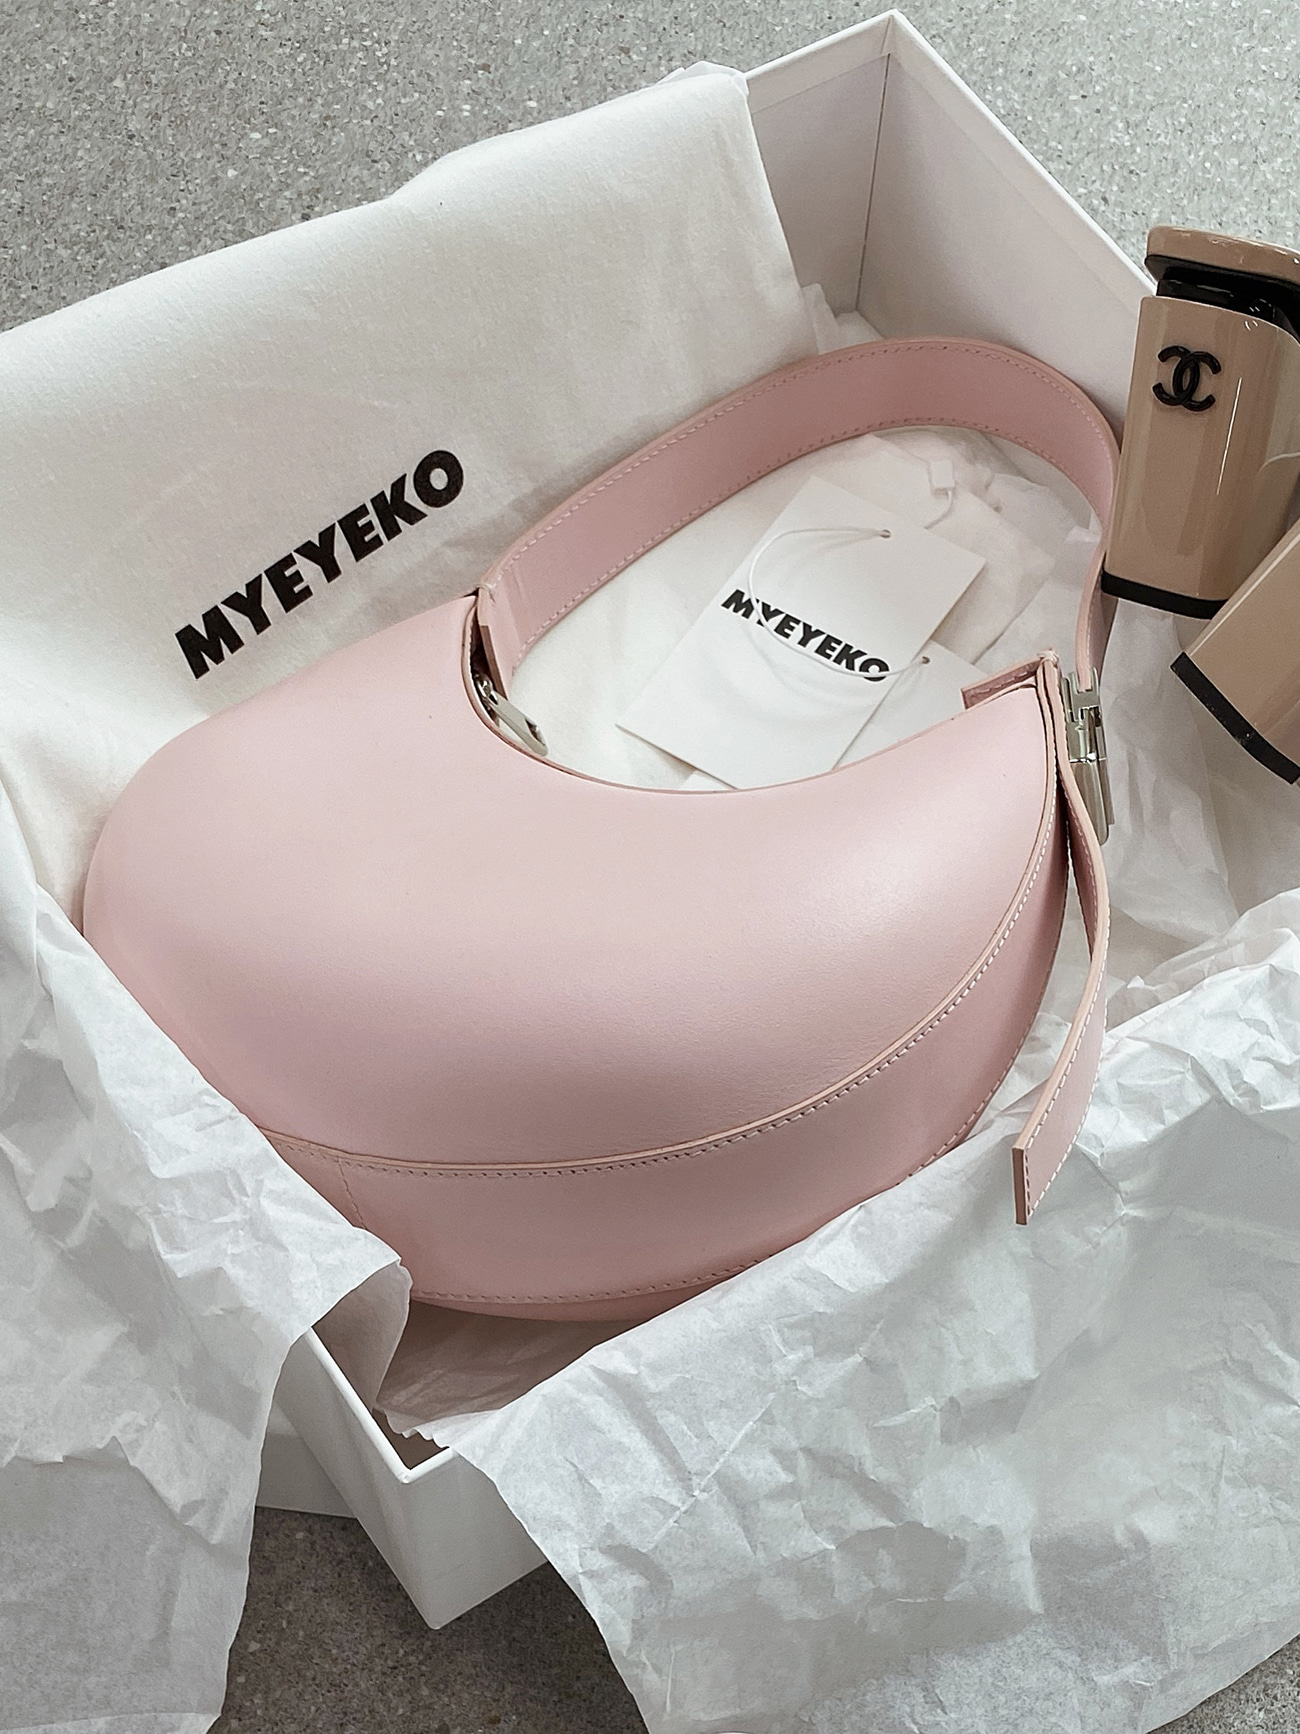 Myeyeko Exclusive Line - POTTERY BAG 포터리백 (PINK) Limited Edition.